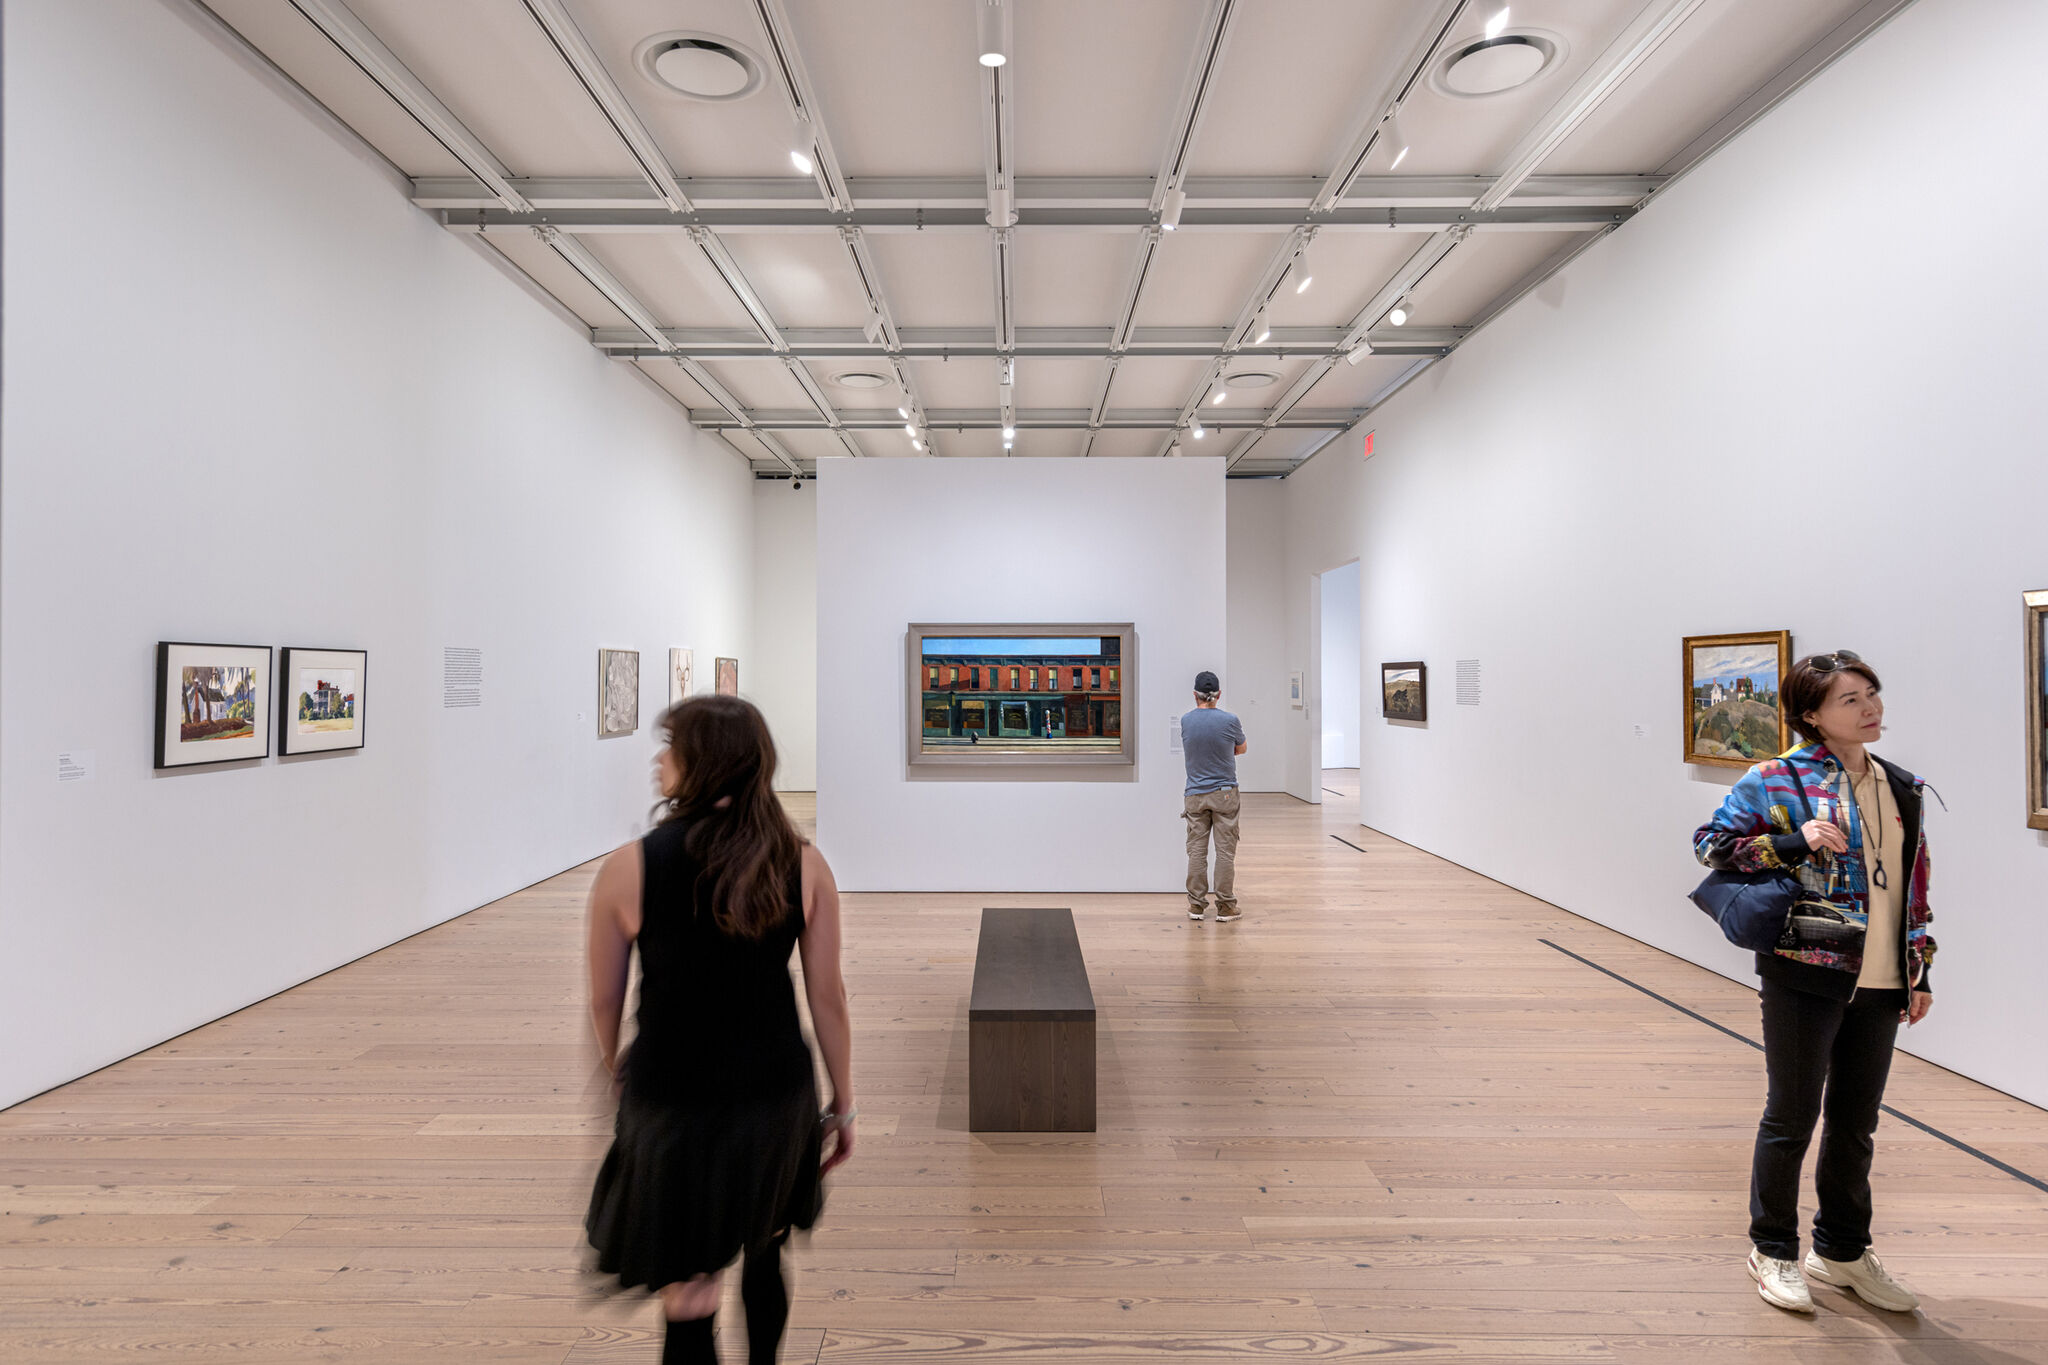 Visitors viewing artwork in a modern gallery with wooden floors and white walls.